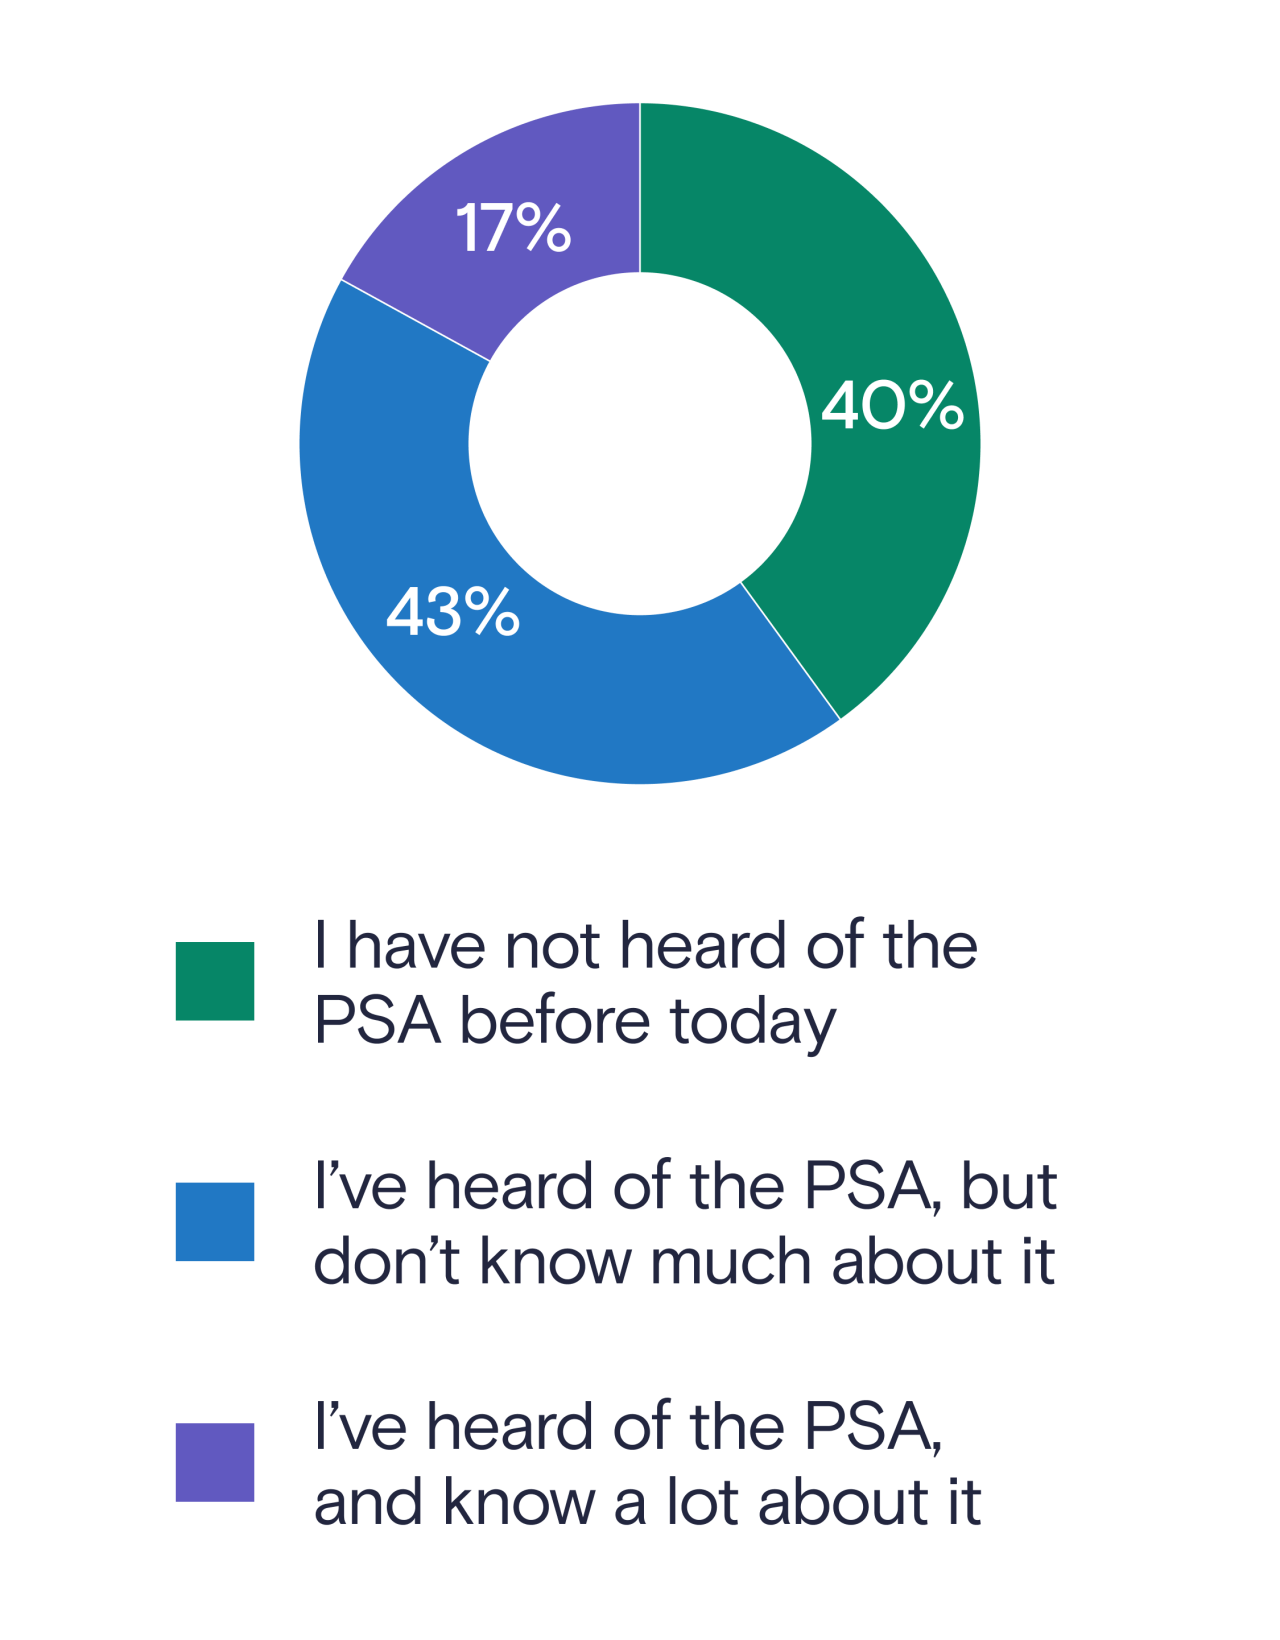 pie chart showing % of people who have heard about PSA before